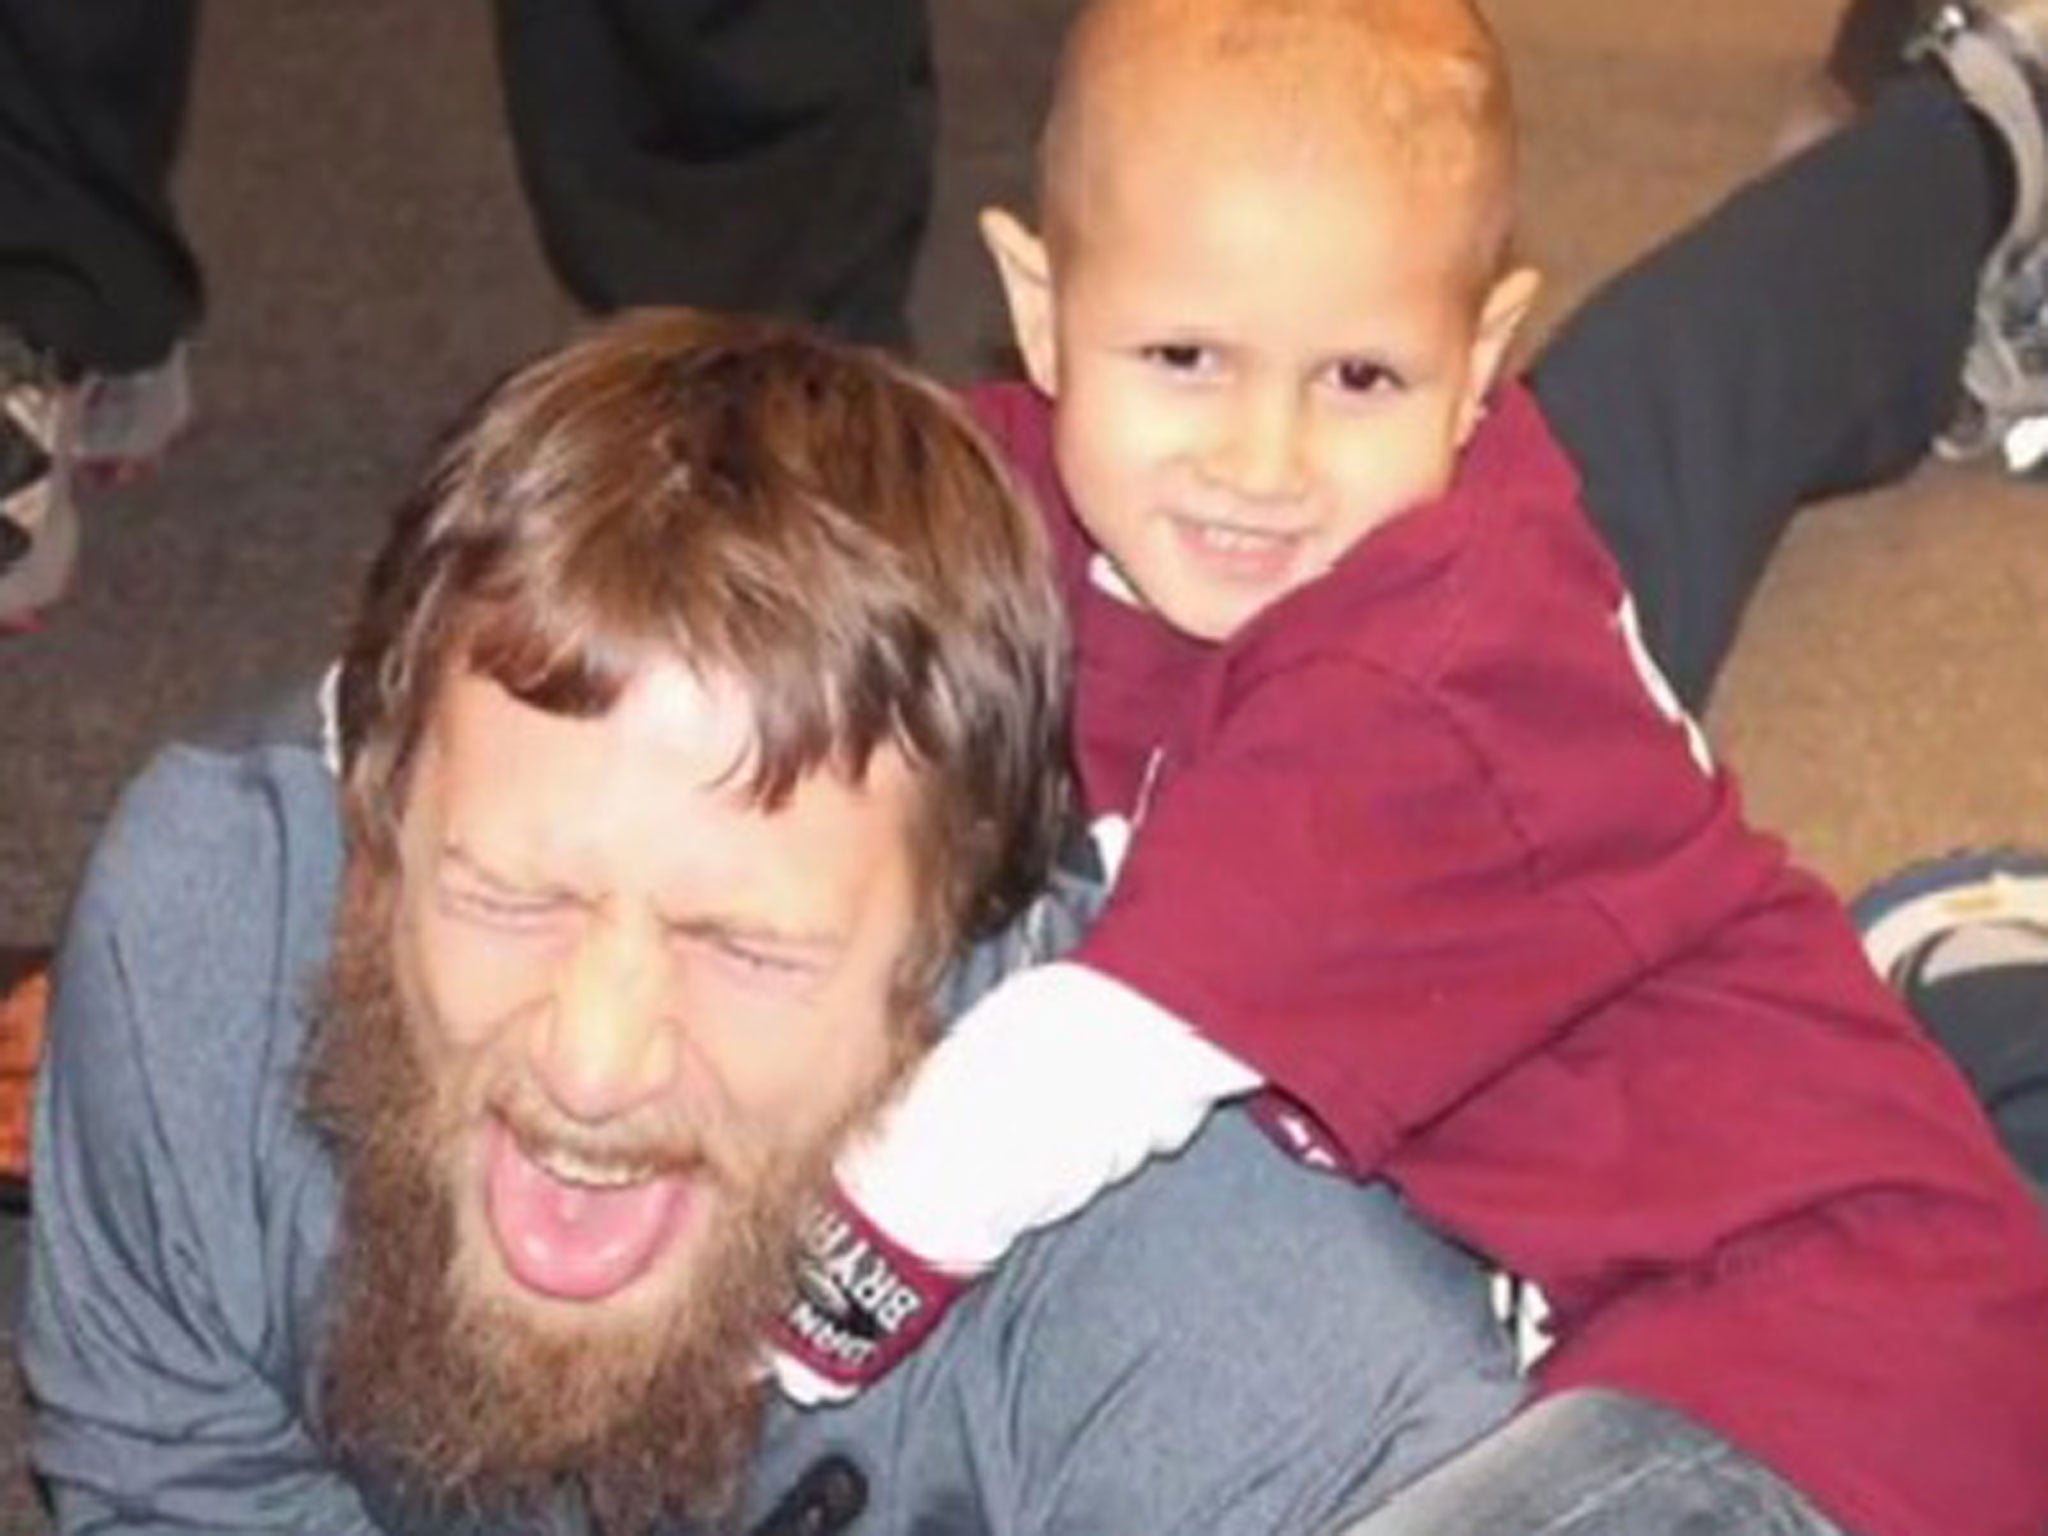 Young Connor (right) performs the Yes! Lock on his hero, the WWE Superstar, Daniel Bryan